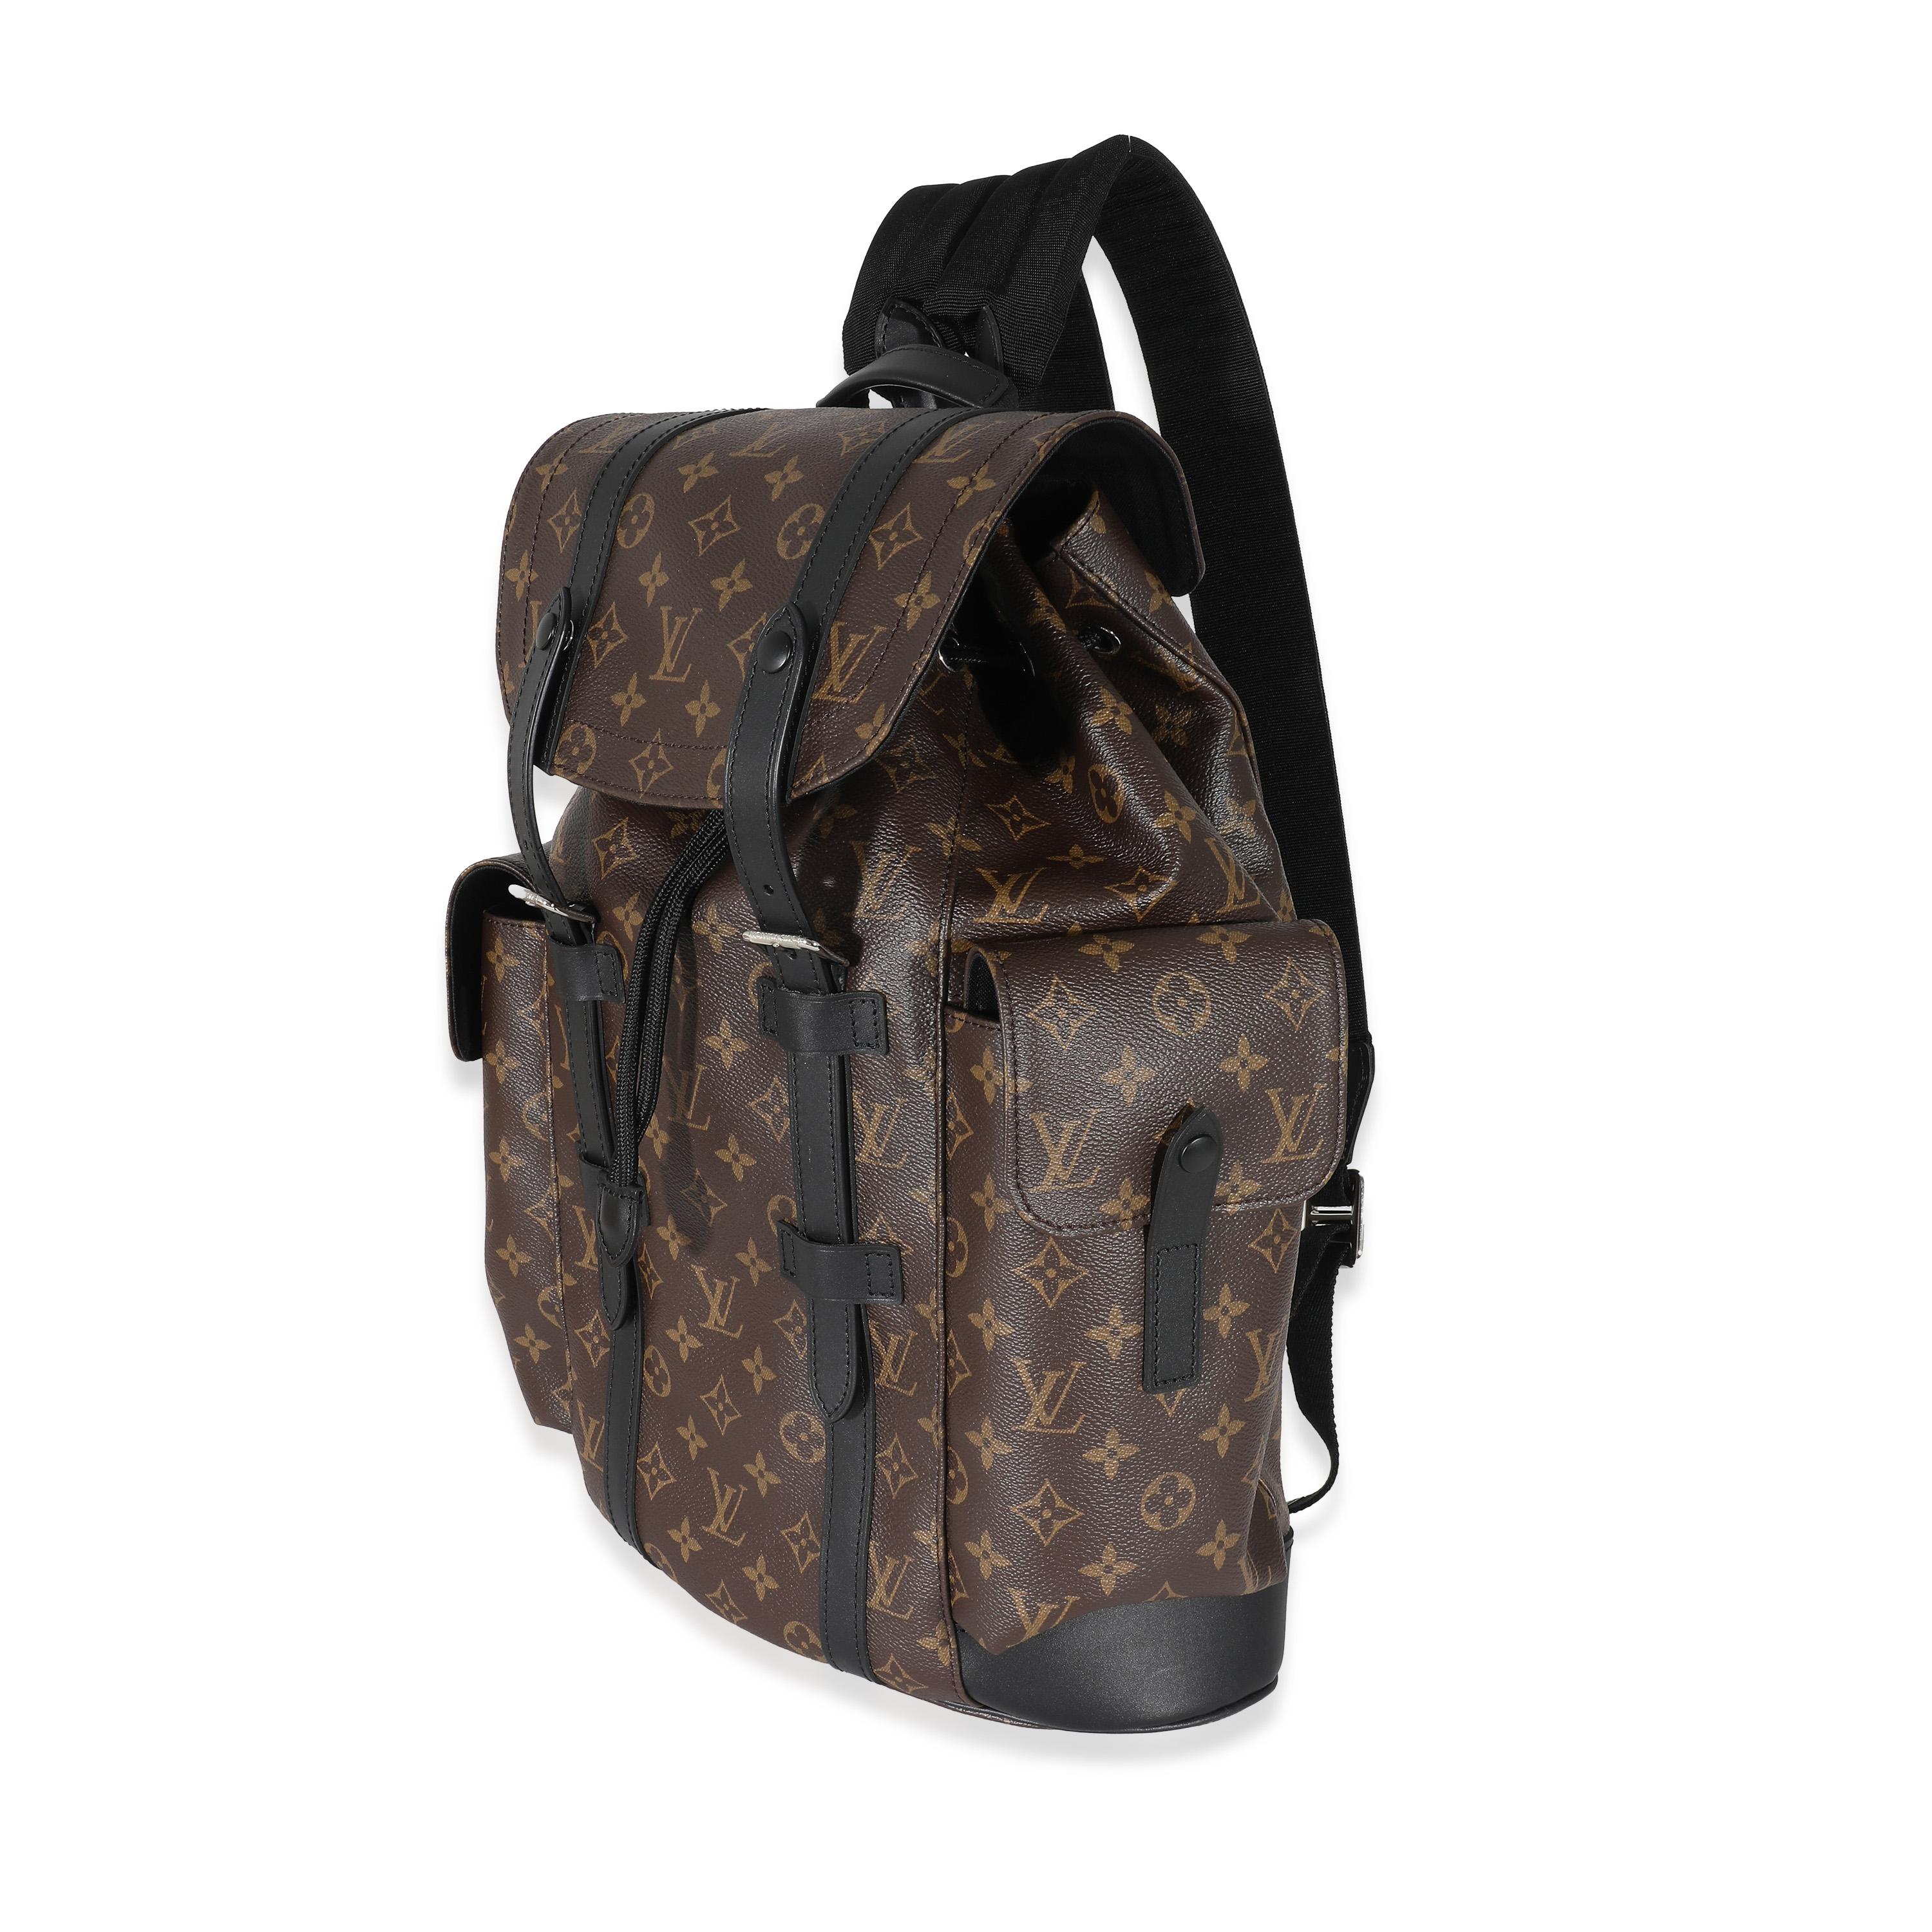 Louis Vuitton Monogram Macassar Christopher Backpack PM In Excellent Condition For Sale In New York, NY